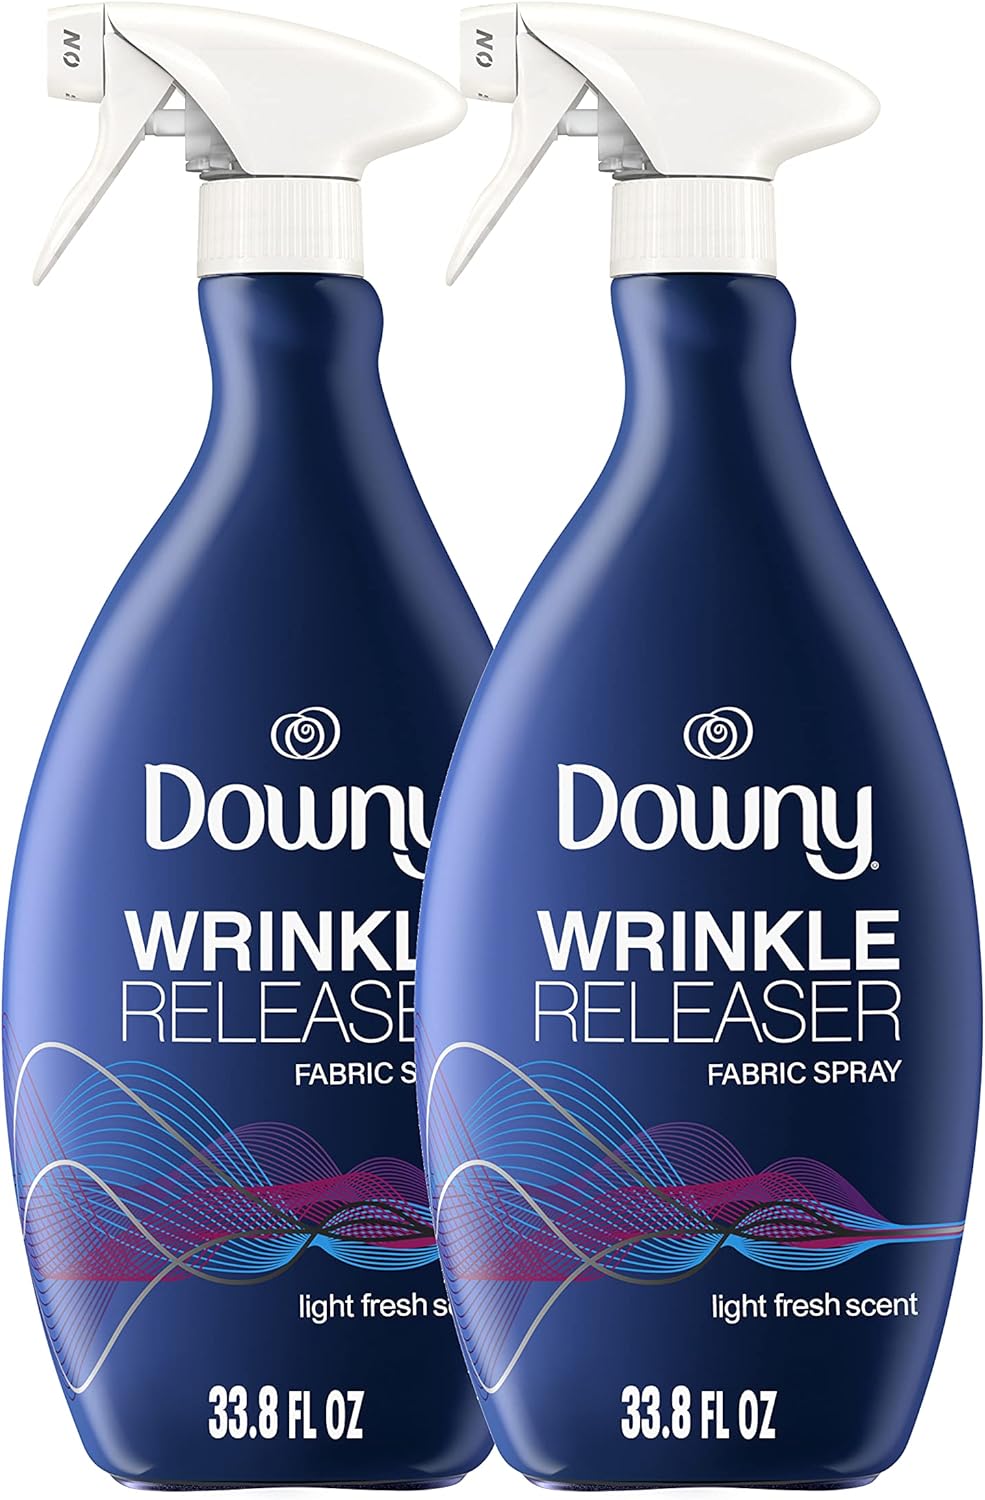 2-Pack 33.8-Oz Downy Wrinkle Releaser Fabric Spray (Light Fresh Scent) $7.55 ($3.77 each) w/ S&S + Free Shipping w/ Prime or on $35+